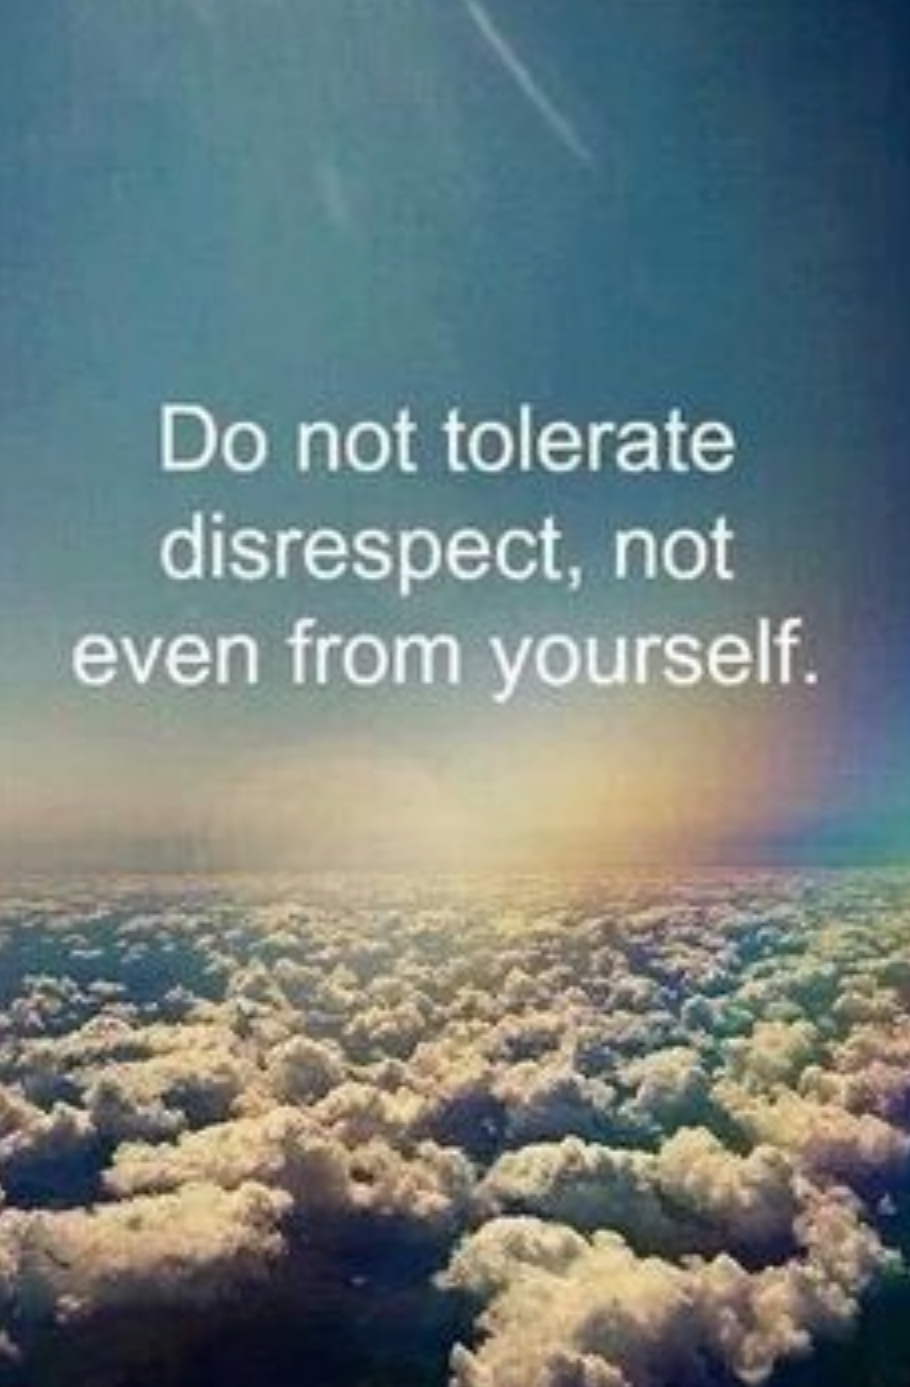 Do not tolerate disrespect, not even from yourself.